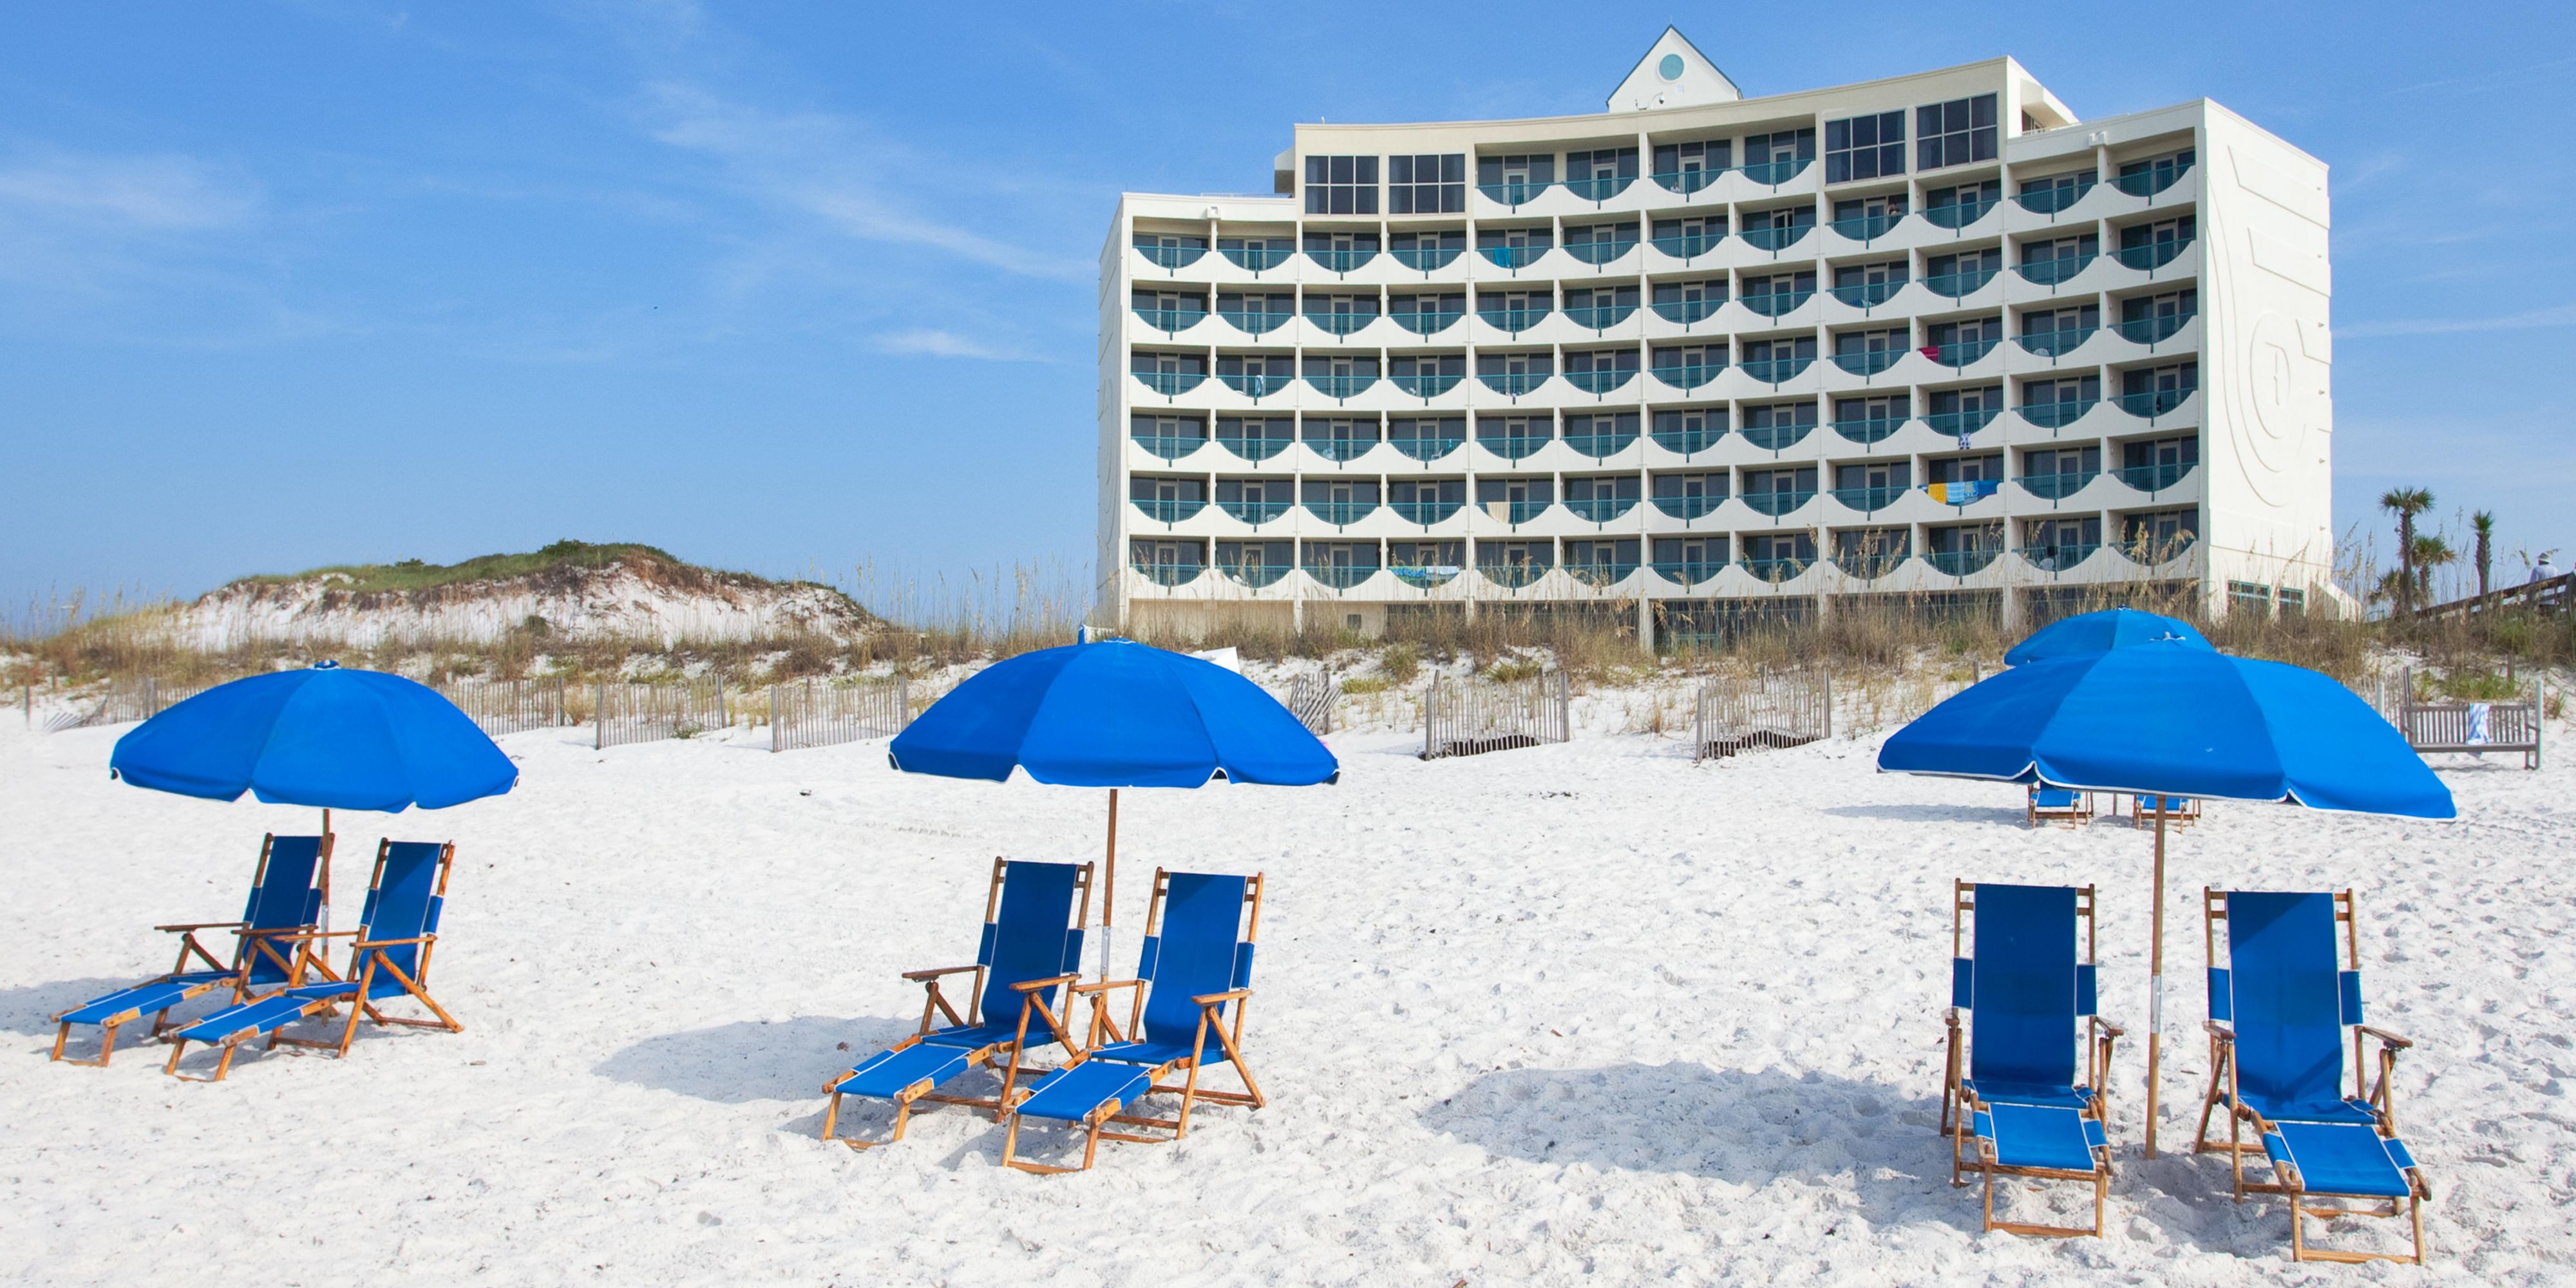 Get the most out of your fun-filled beach day in a spot where you can enjoy endless ocean views.  You can't go wrong basking under the sun while relaxing on a comfortable Lazy Day chair with an umbrella.  Beach chair rentals end Nov 1st.